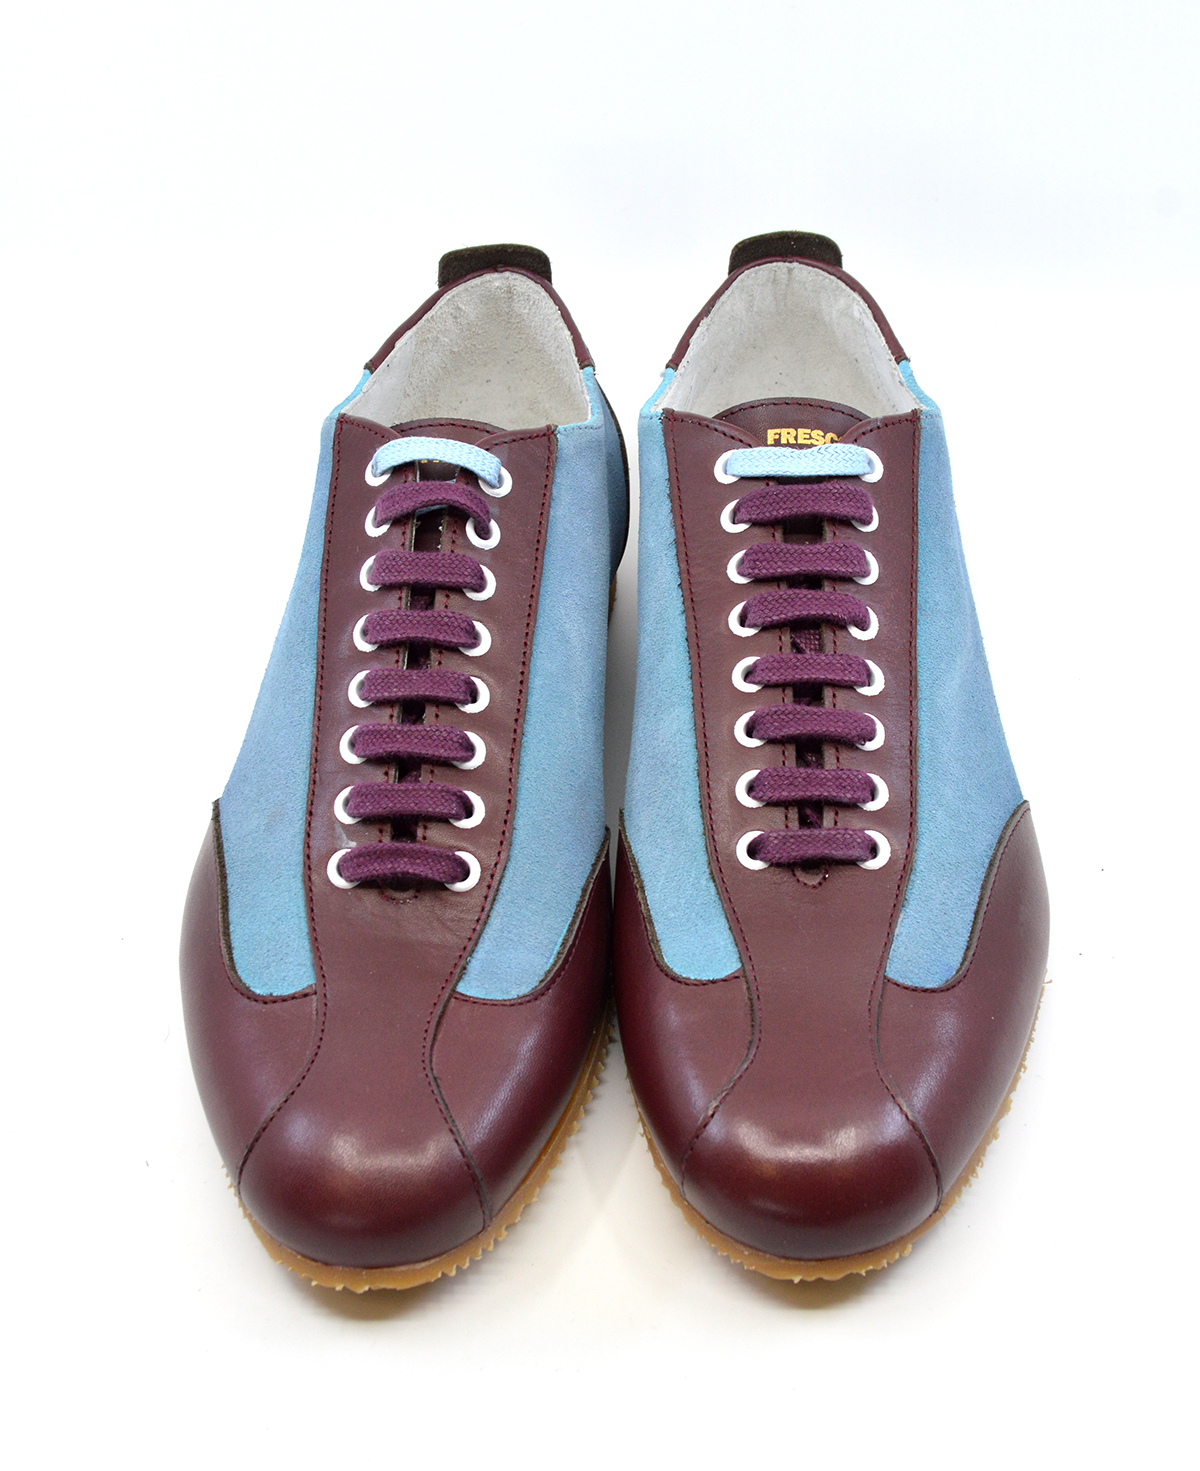 luke trainers claret and blue